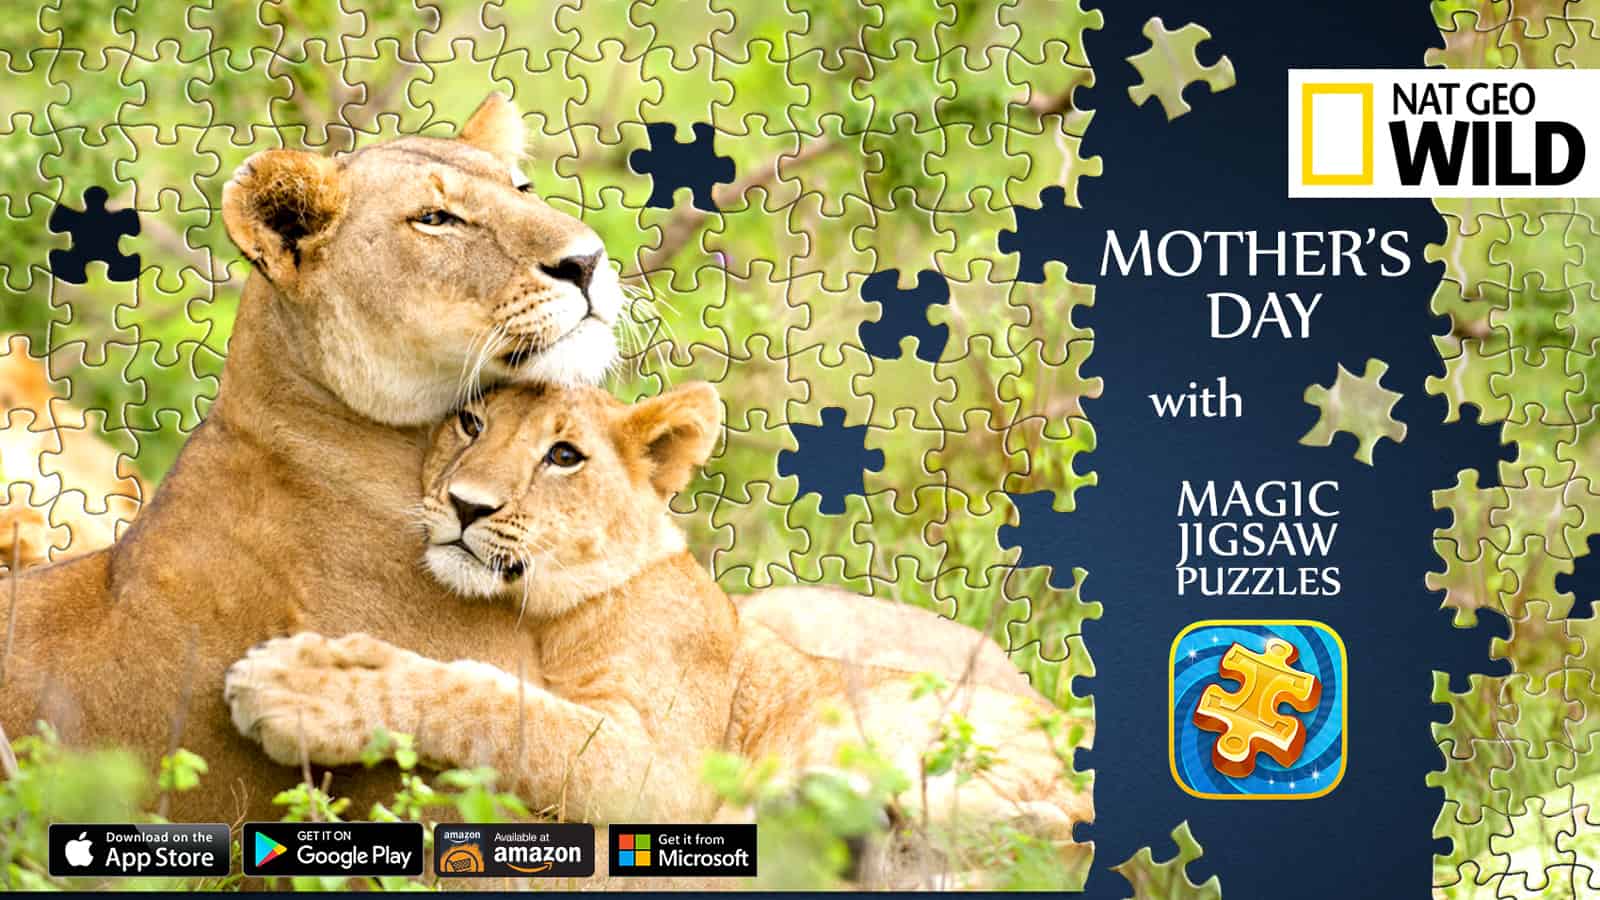 free jigsaw puzzles online national geographic